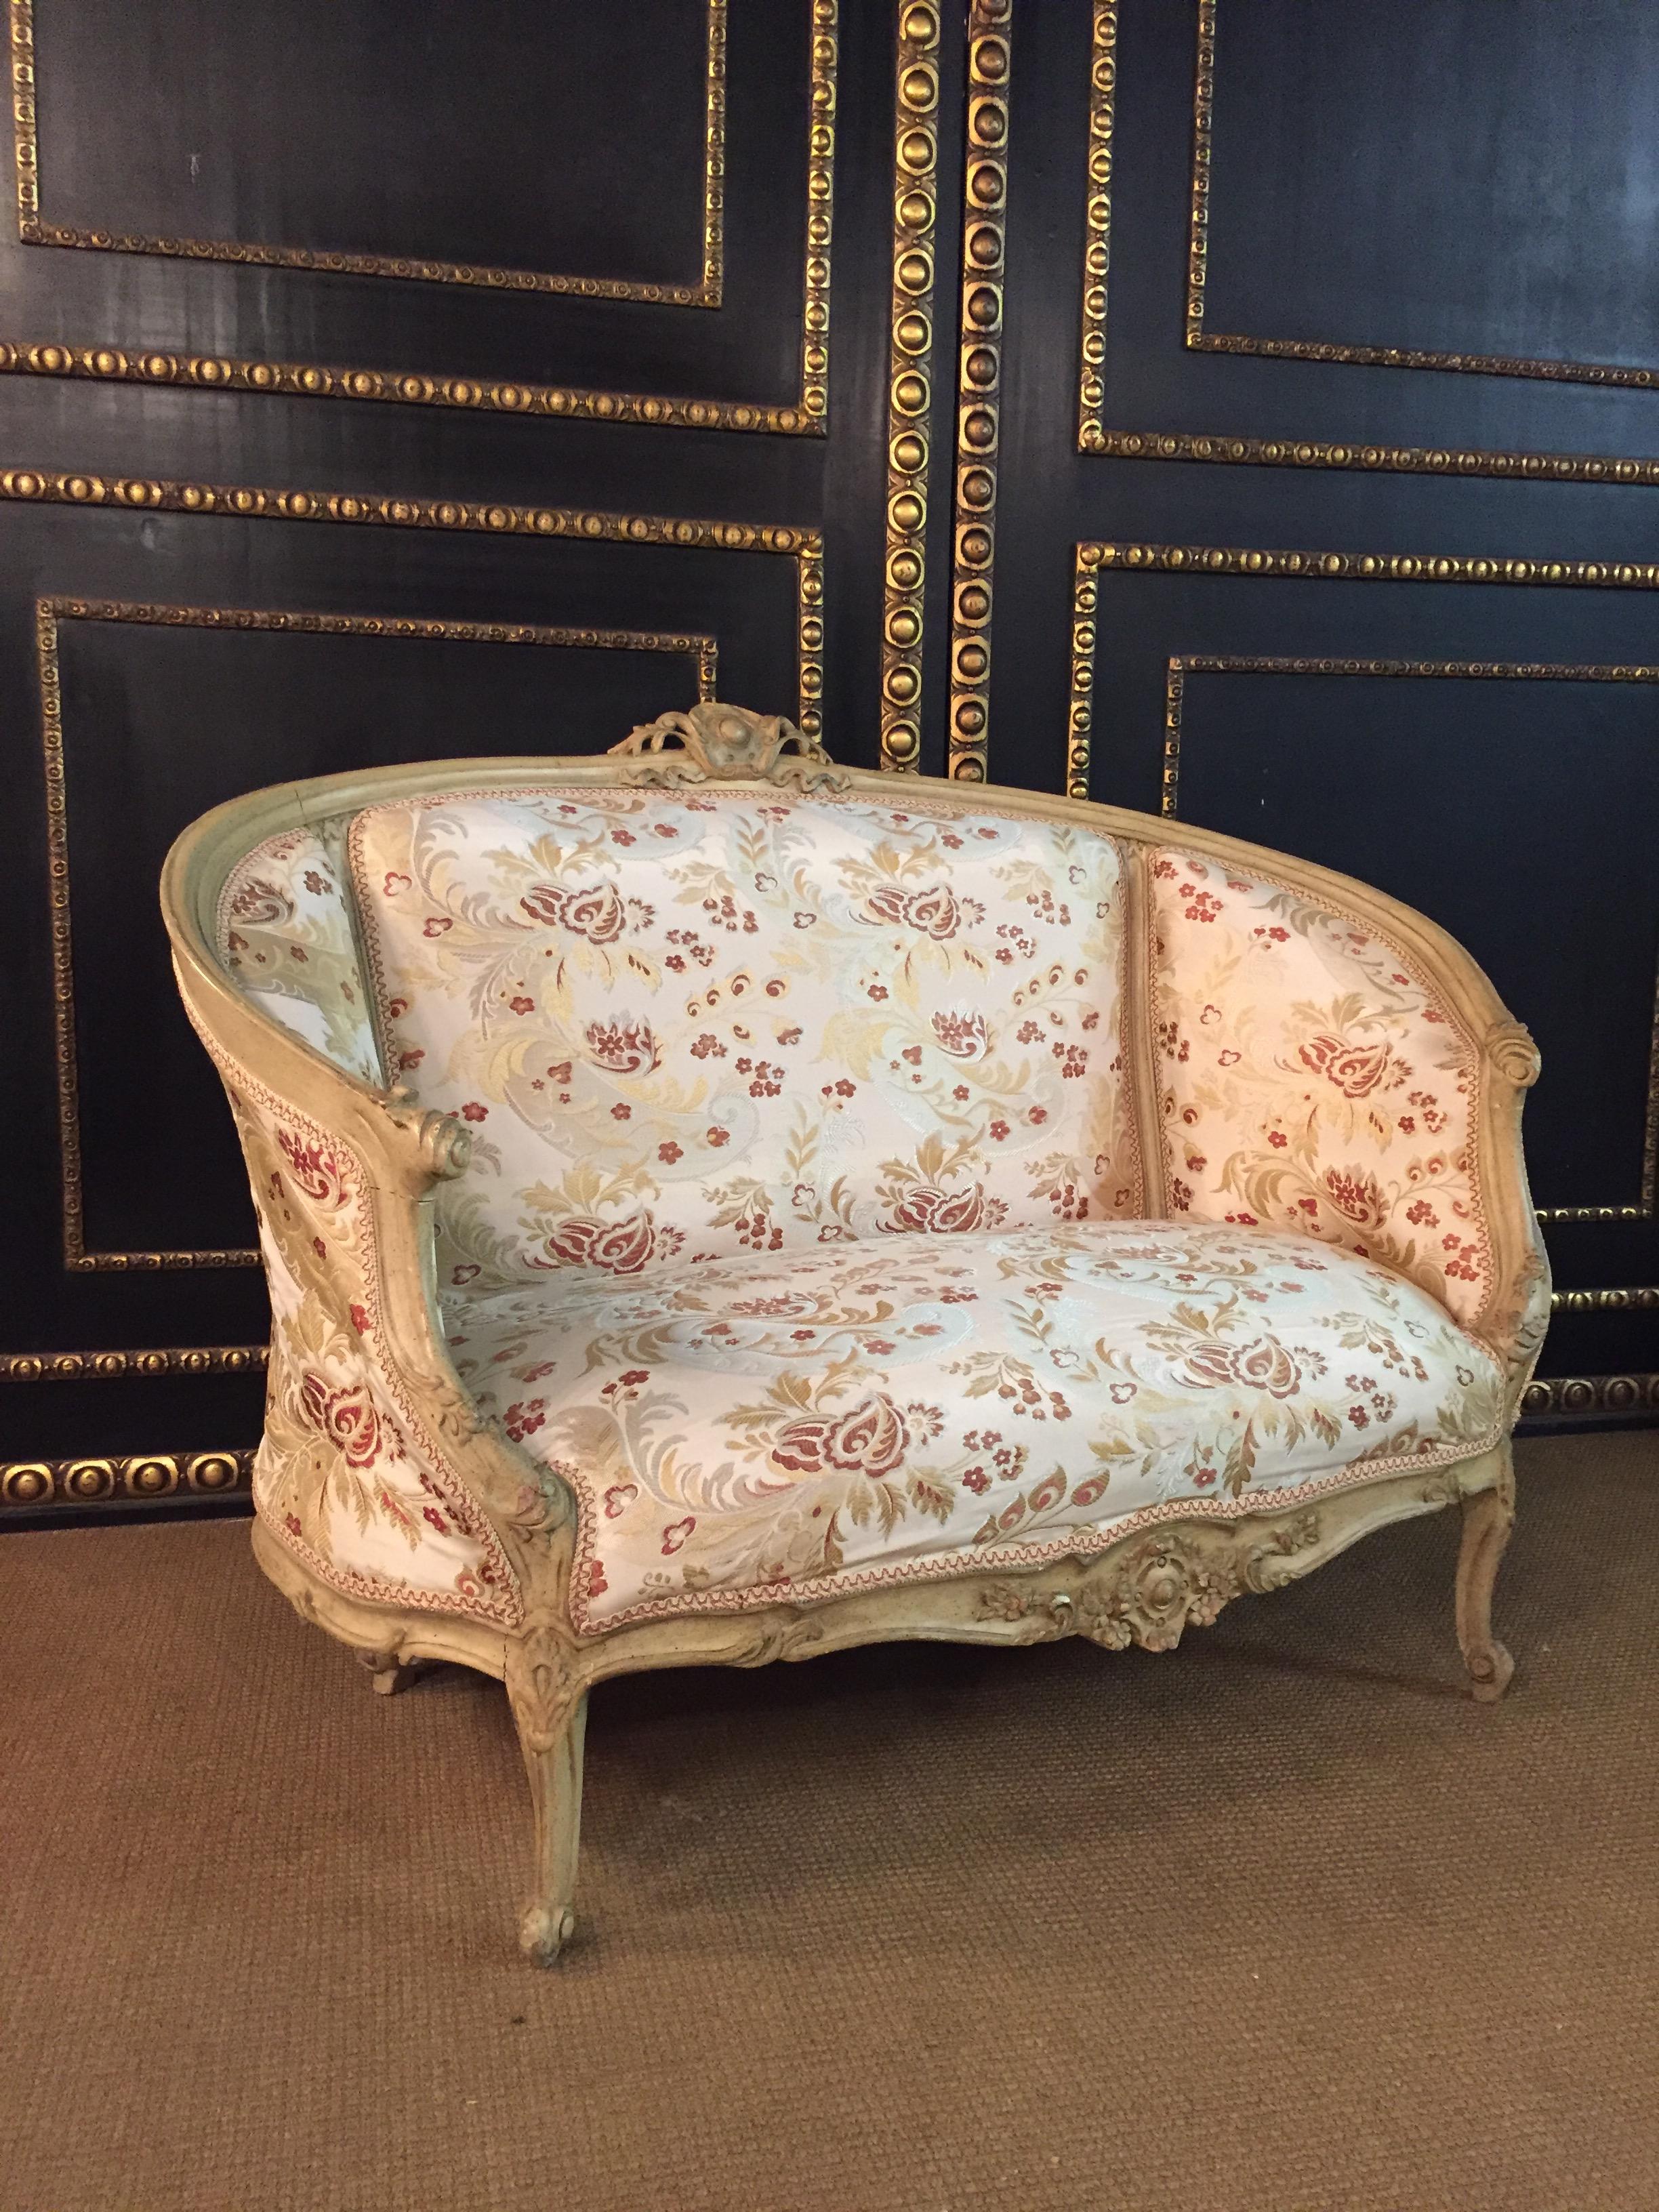 Solid beechwood, carved, colored and gilded. Semicircular ascending backrest frame with perforated rocaille crowning. Passive curved frame with richly reifiert carved leaf. Slightly bent frame on curly legs. The seat and backrest are finished with a